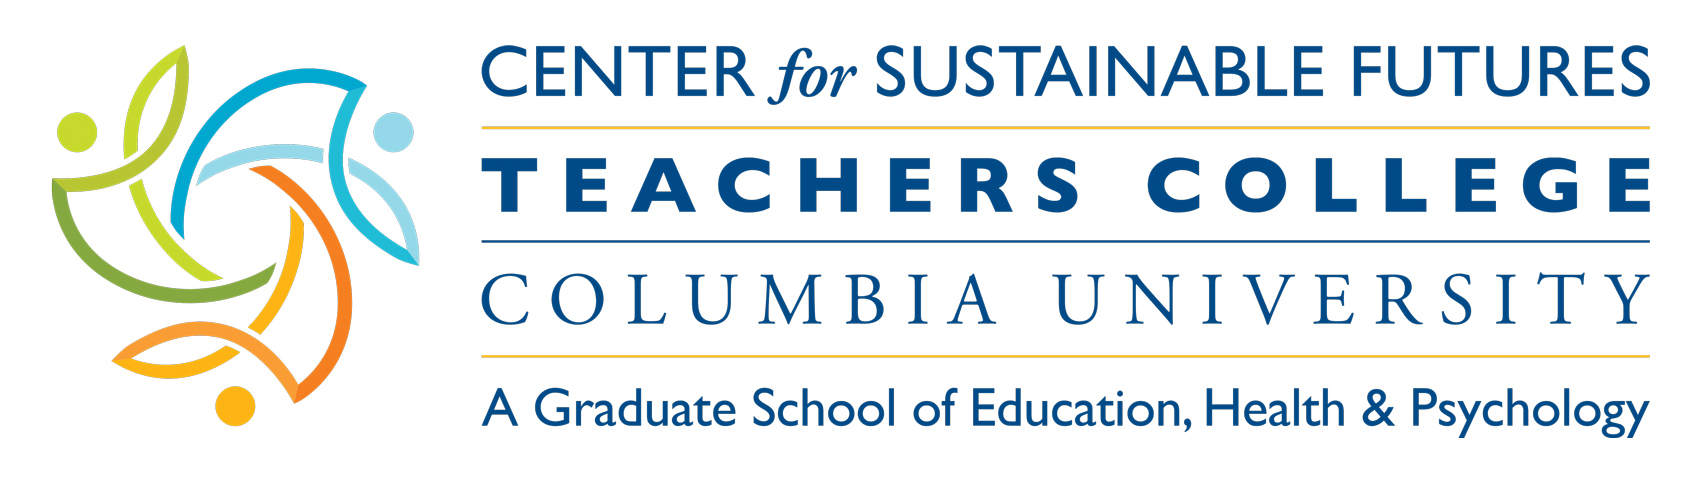 Center for Sustainable Futures Logo